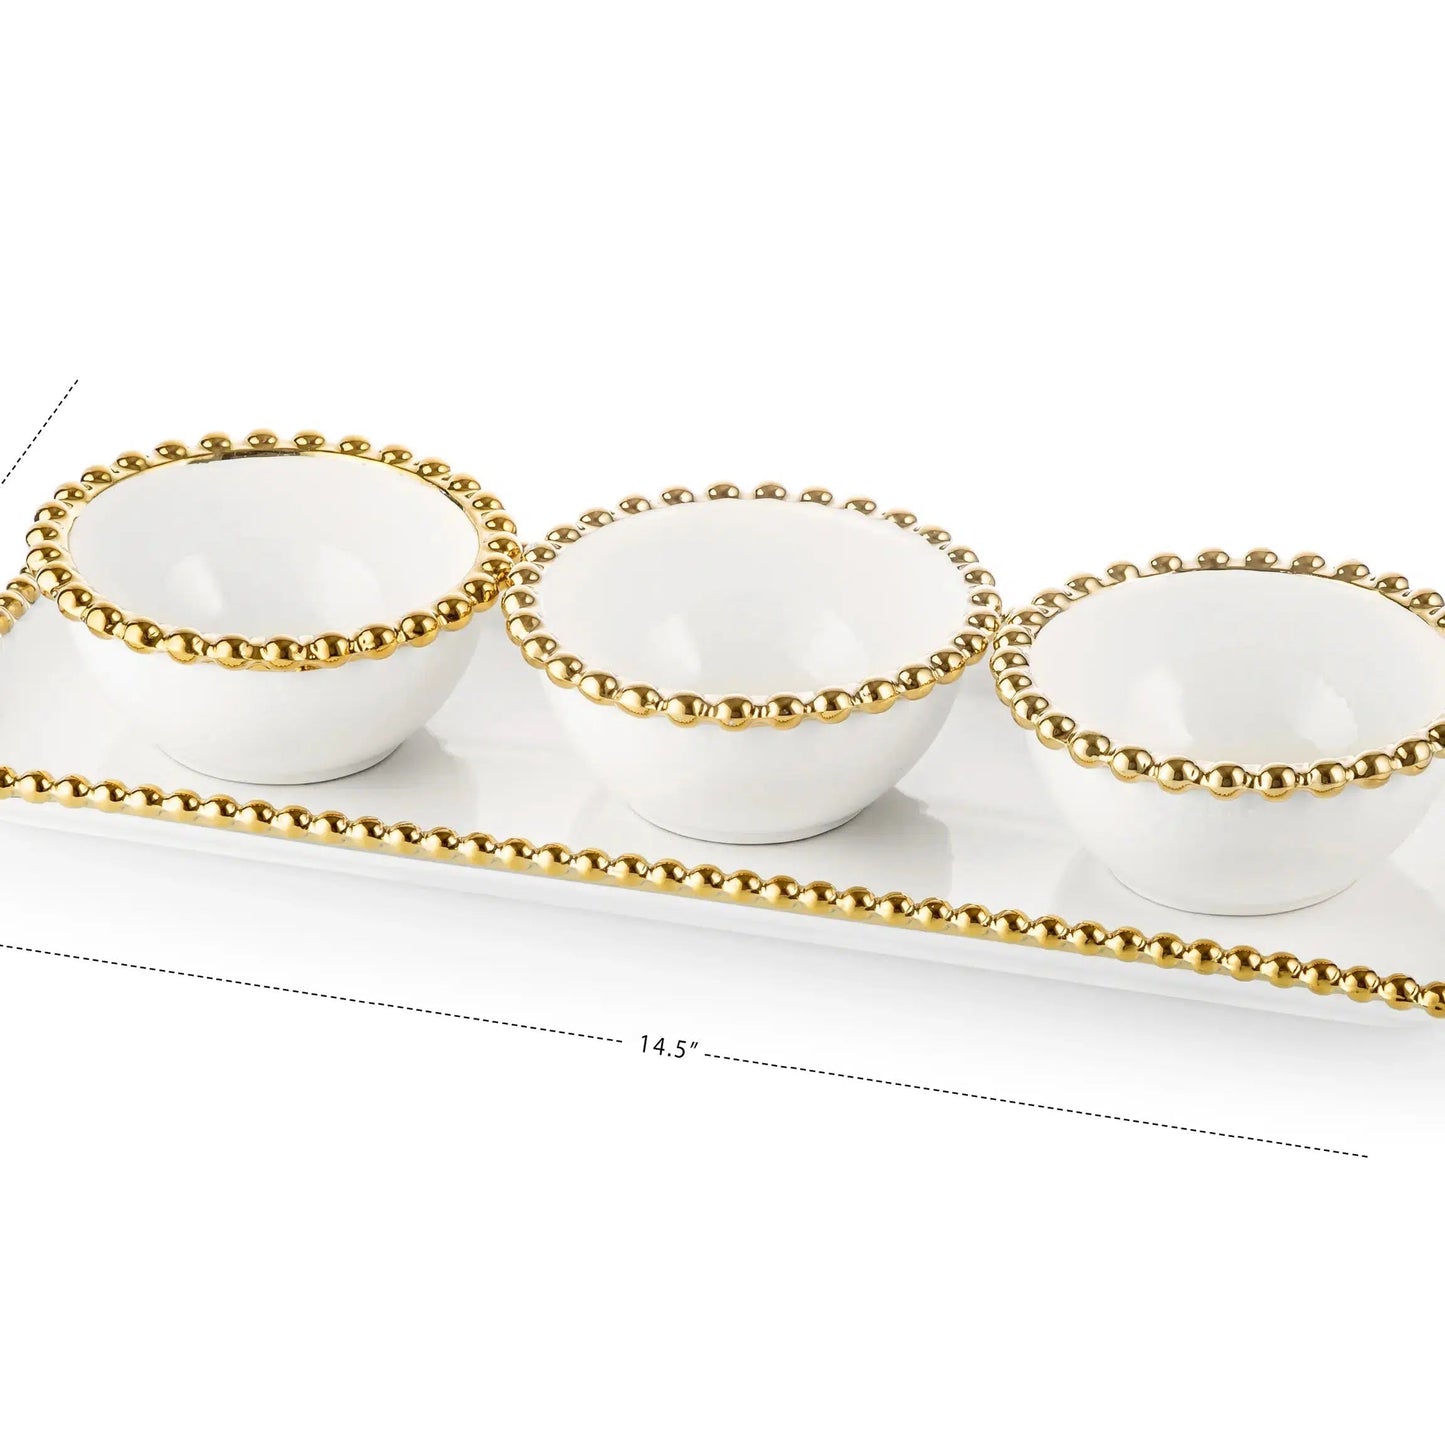 White Porcelain 3 Bowl Relish Dish with Gold Beaded Design Snack Bowls High Class Touch - Home Decor 